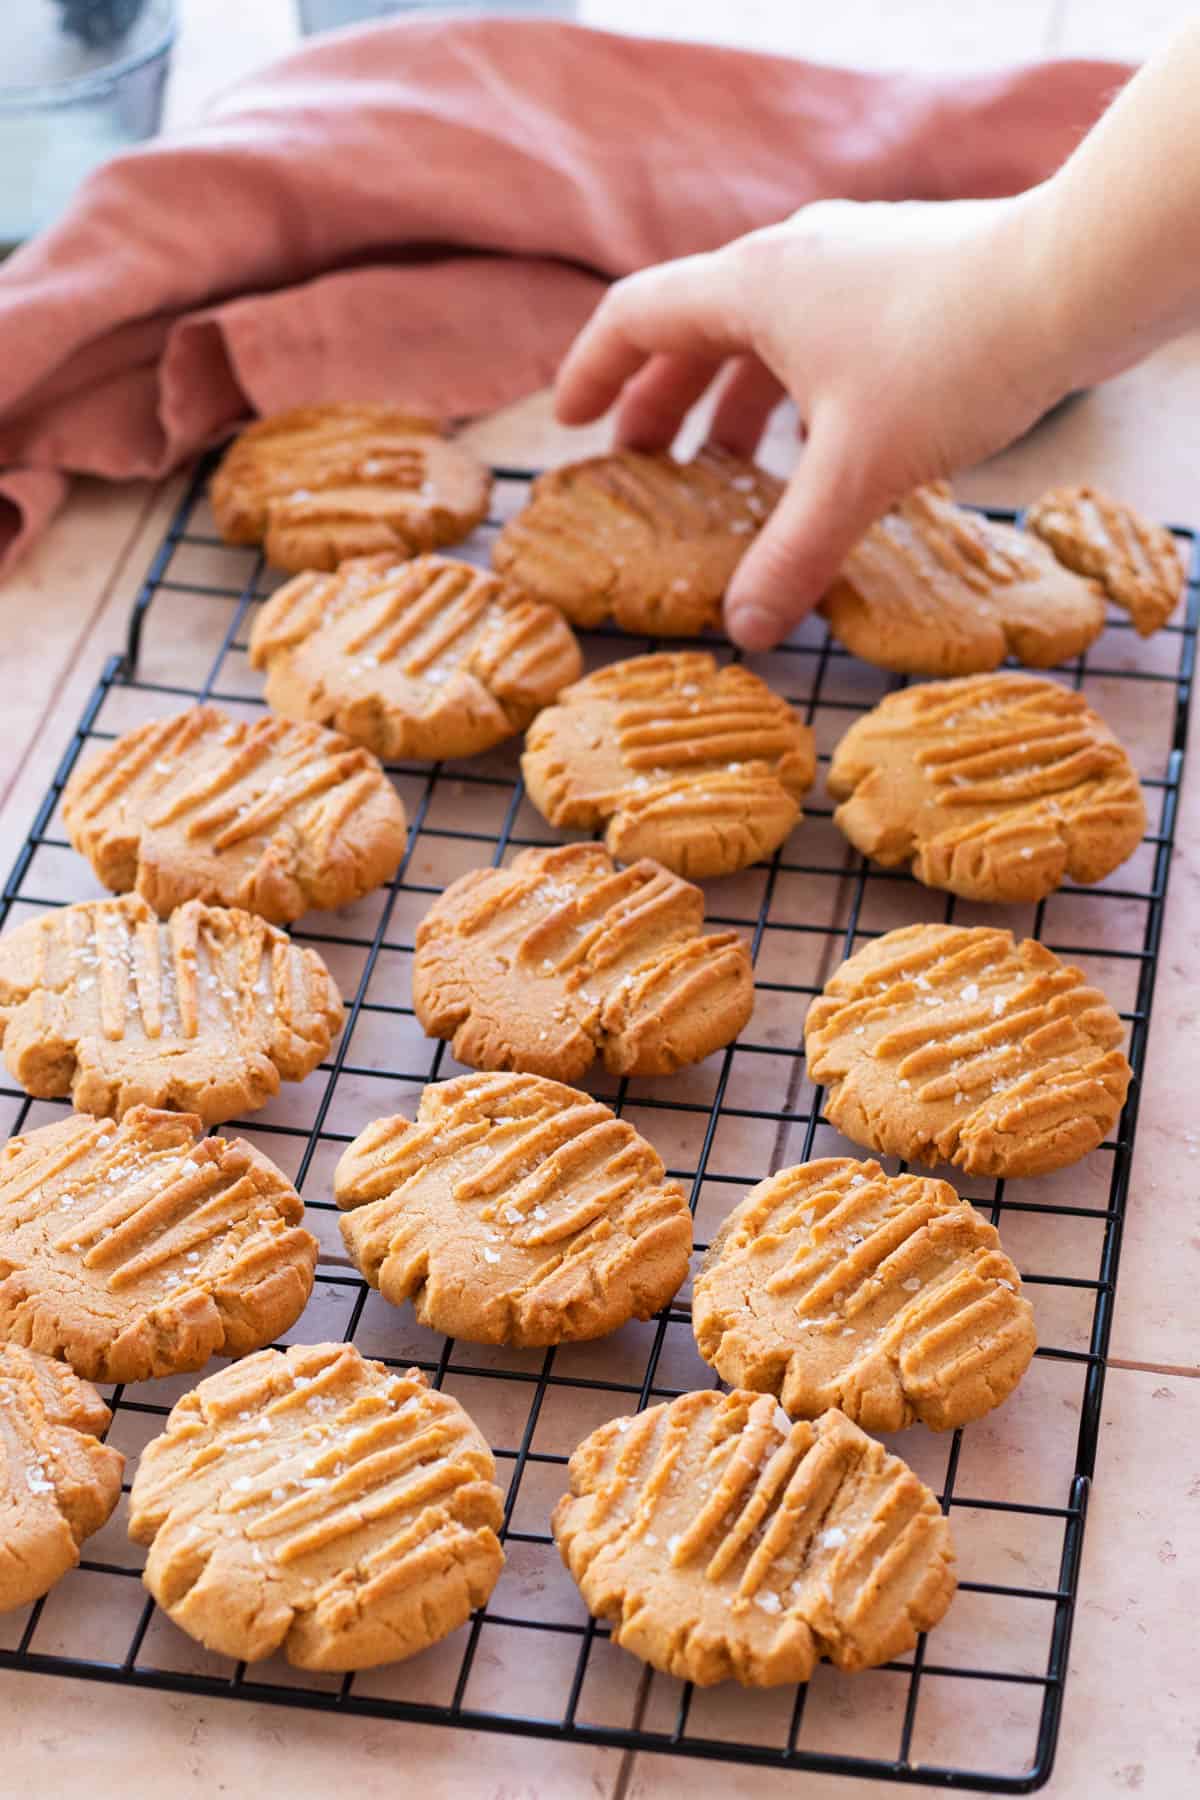 A peanut butter cookie being piked up from a wire rack.